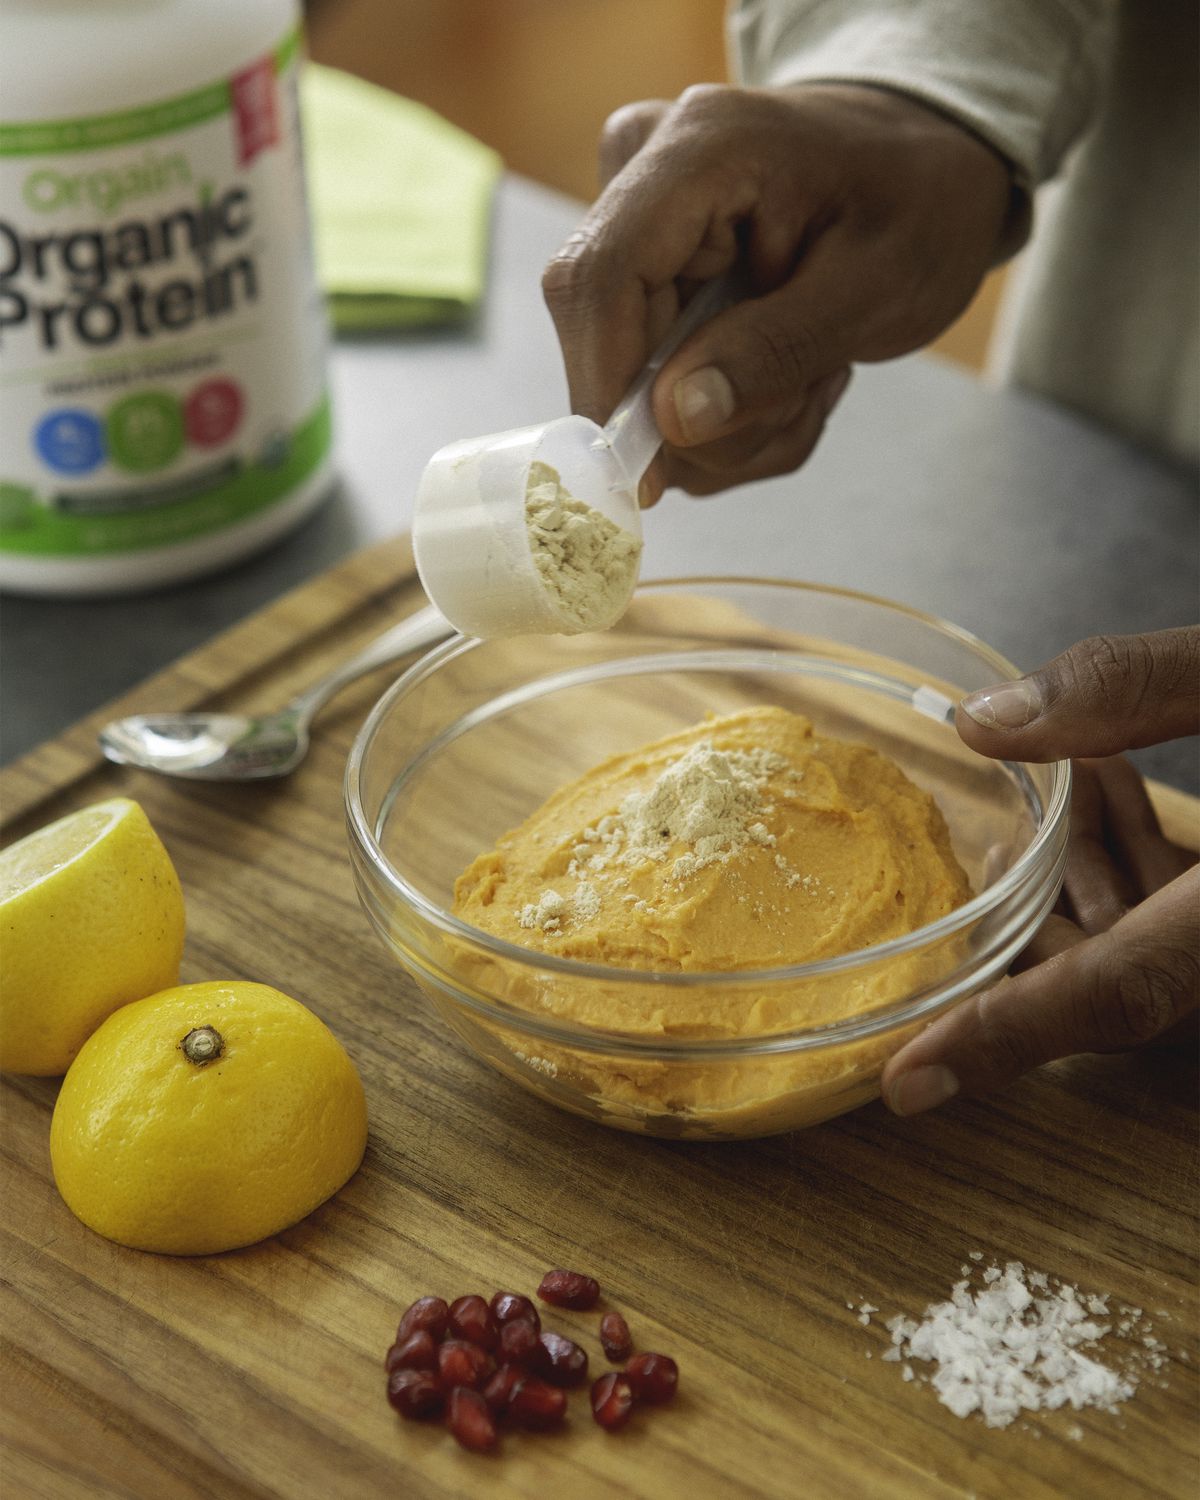 A person mixes protein powder into an orange dip with lemons and pomegranate seeds on the same cutting board